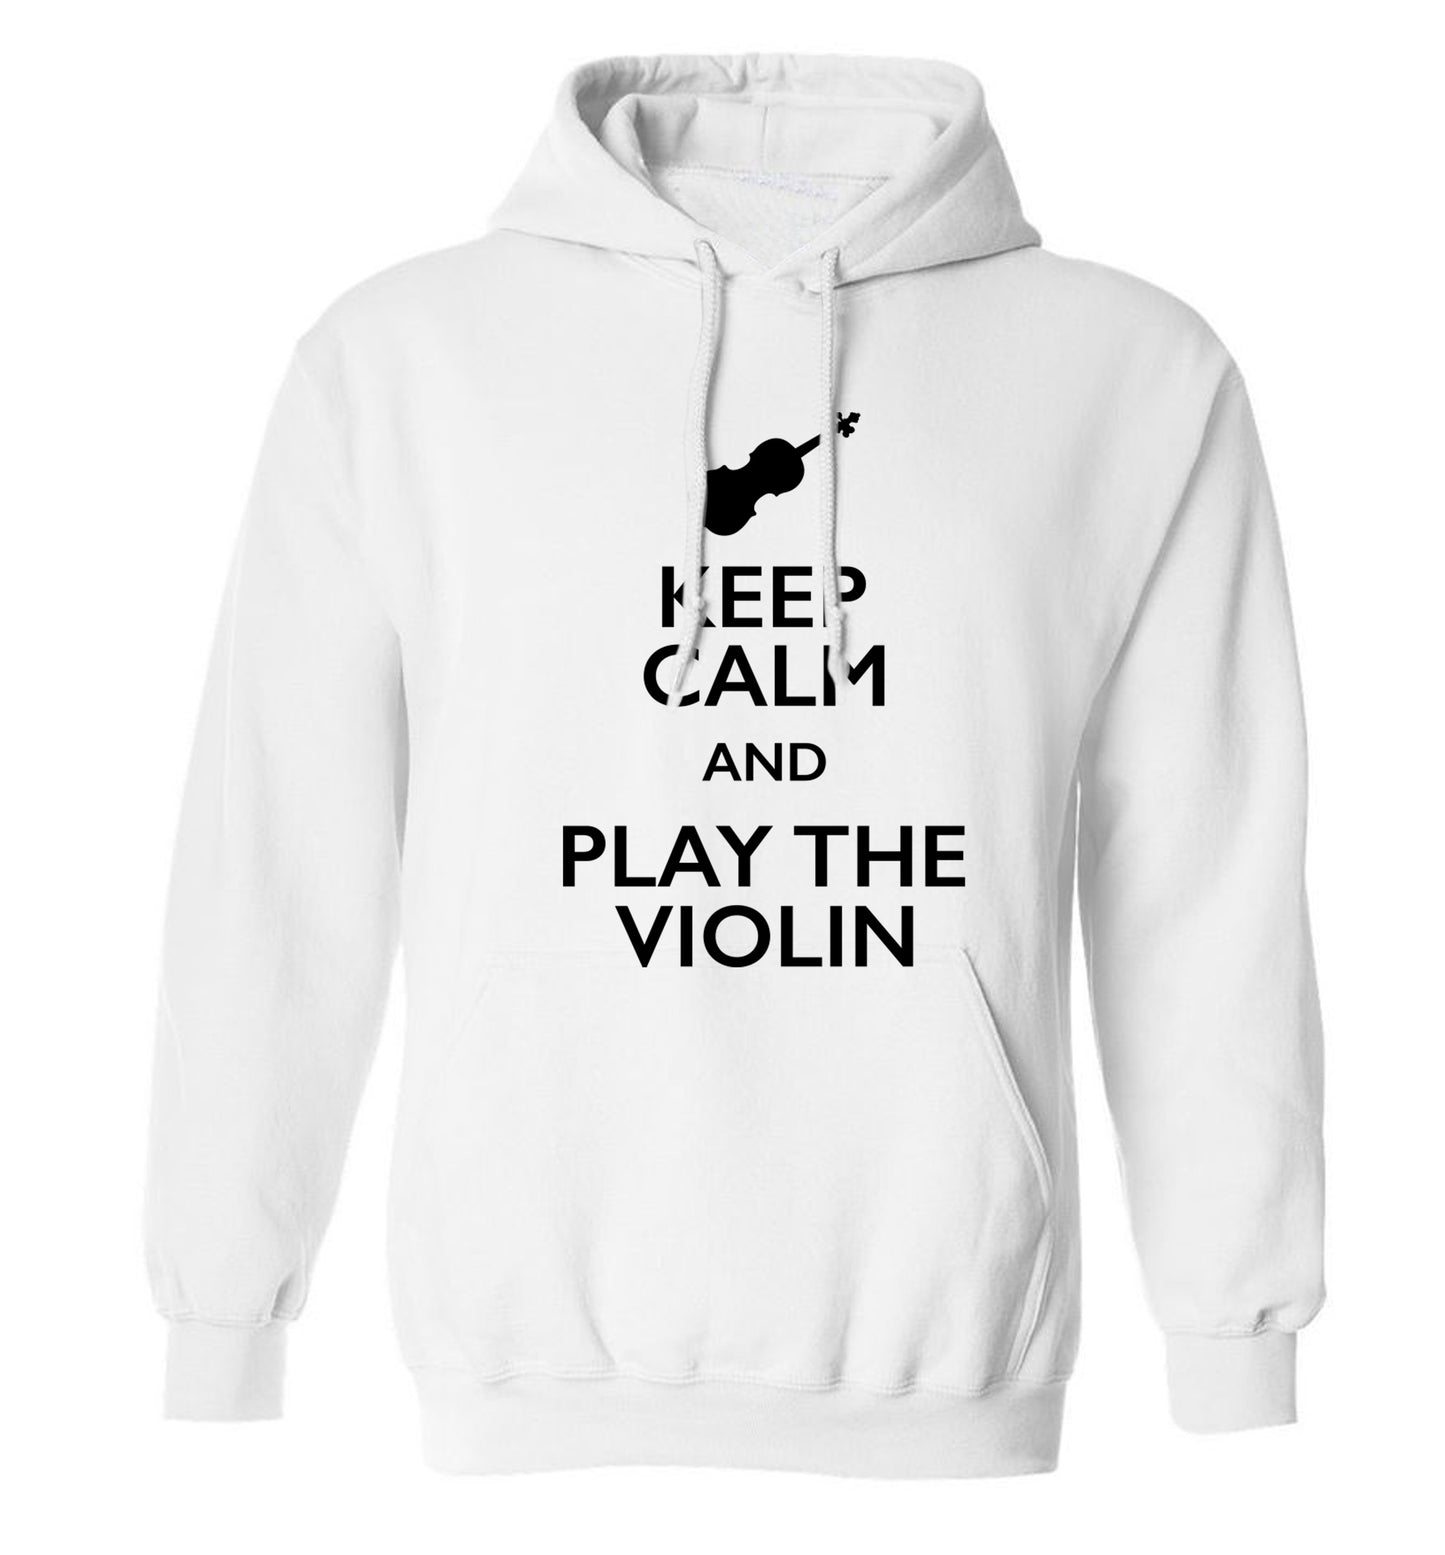 Keep calm and play the violin adults unisex white hoodie 2XL